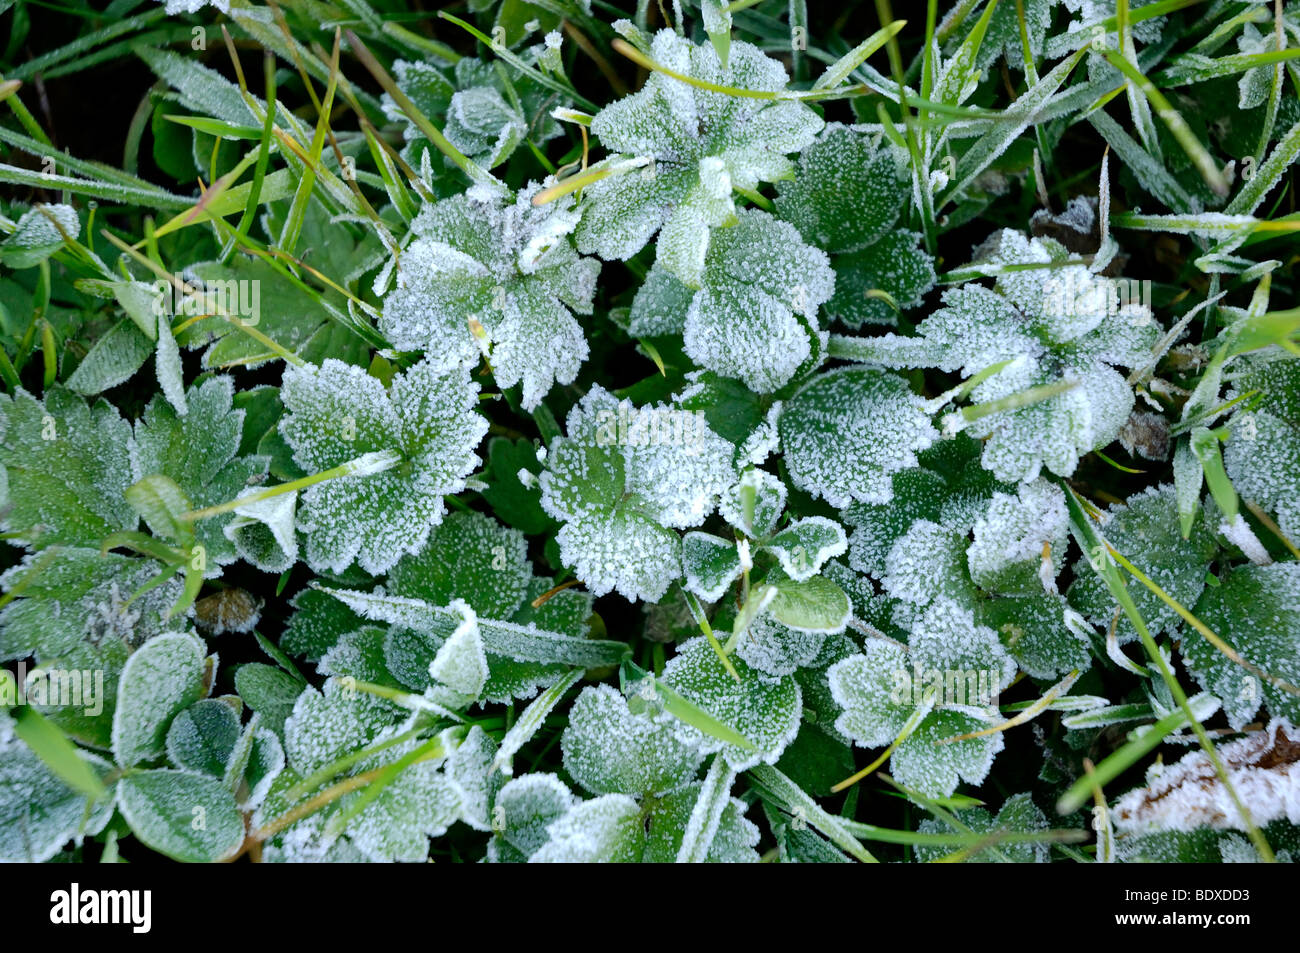 Meadow with frost on grass and leaves Stock Photo